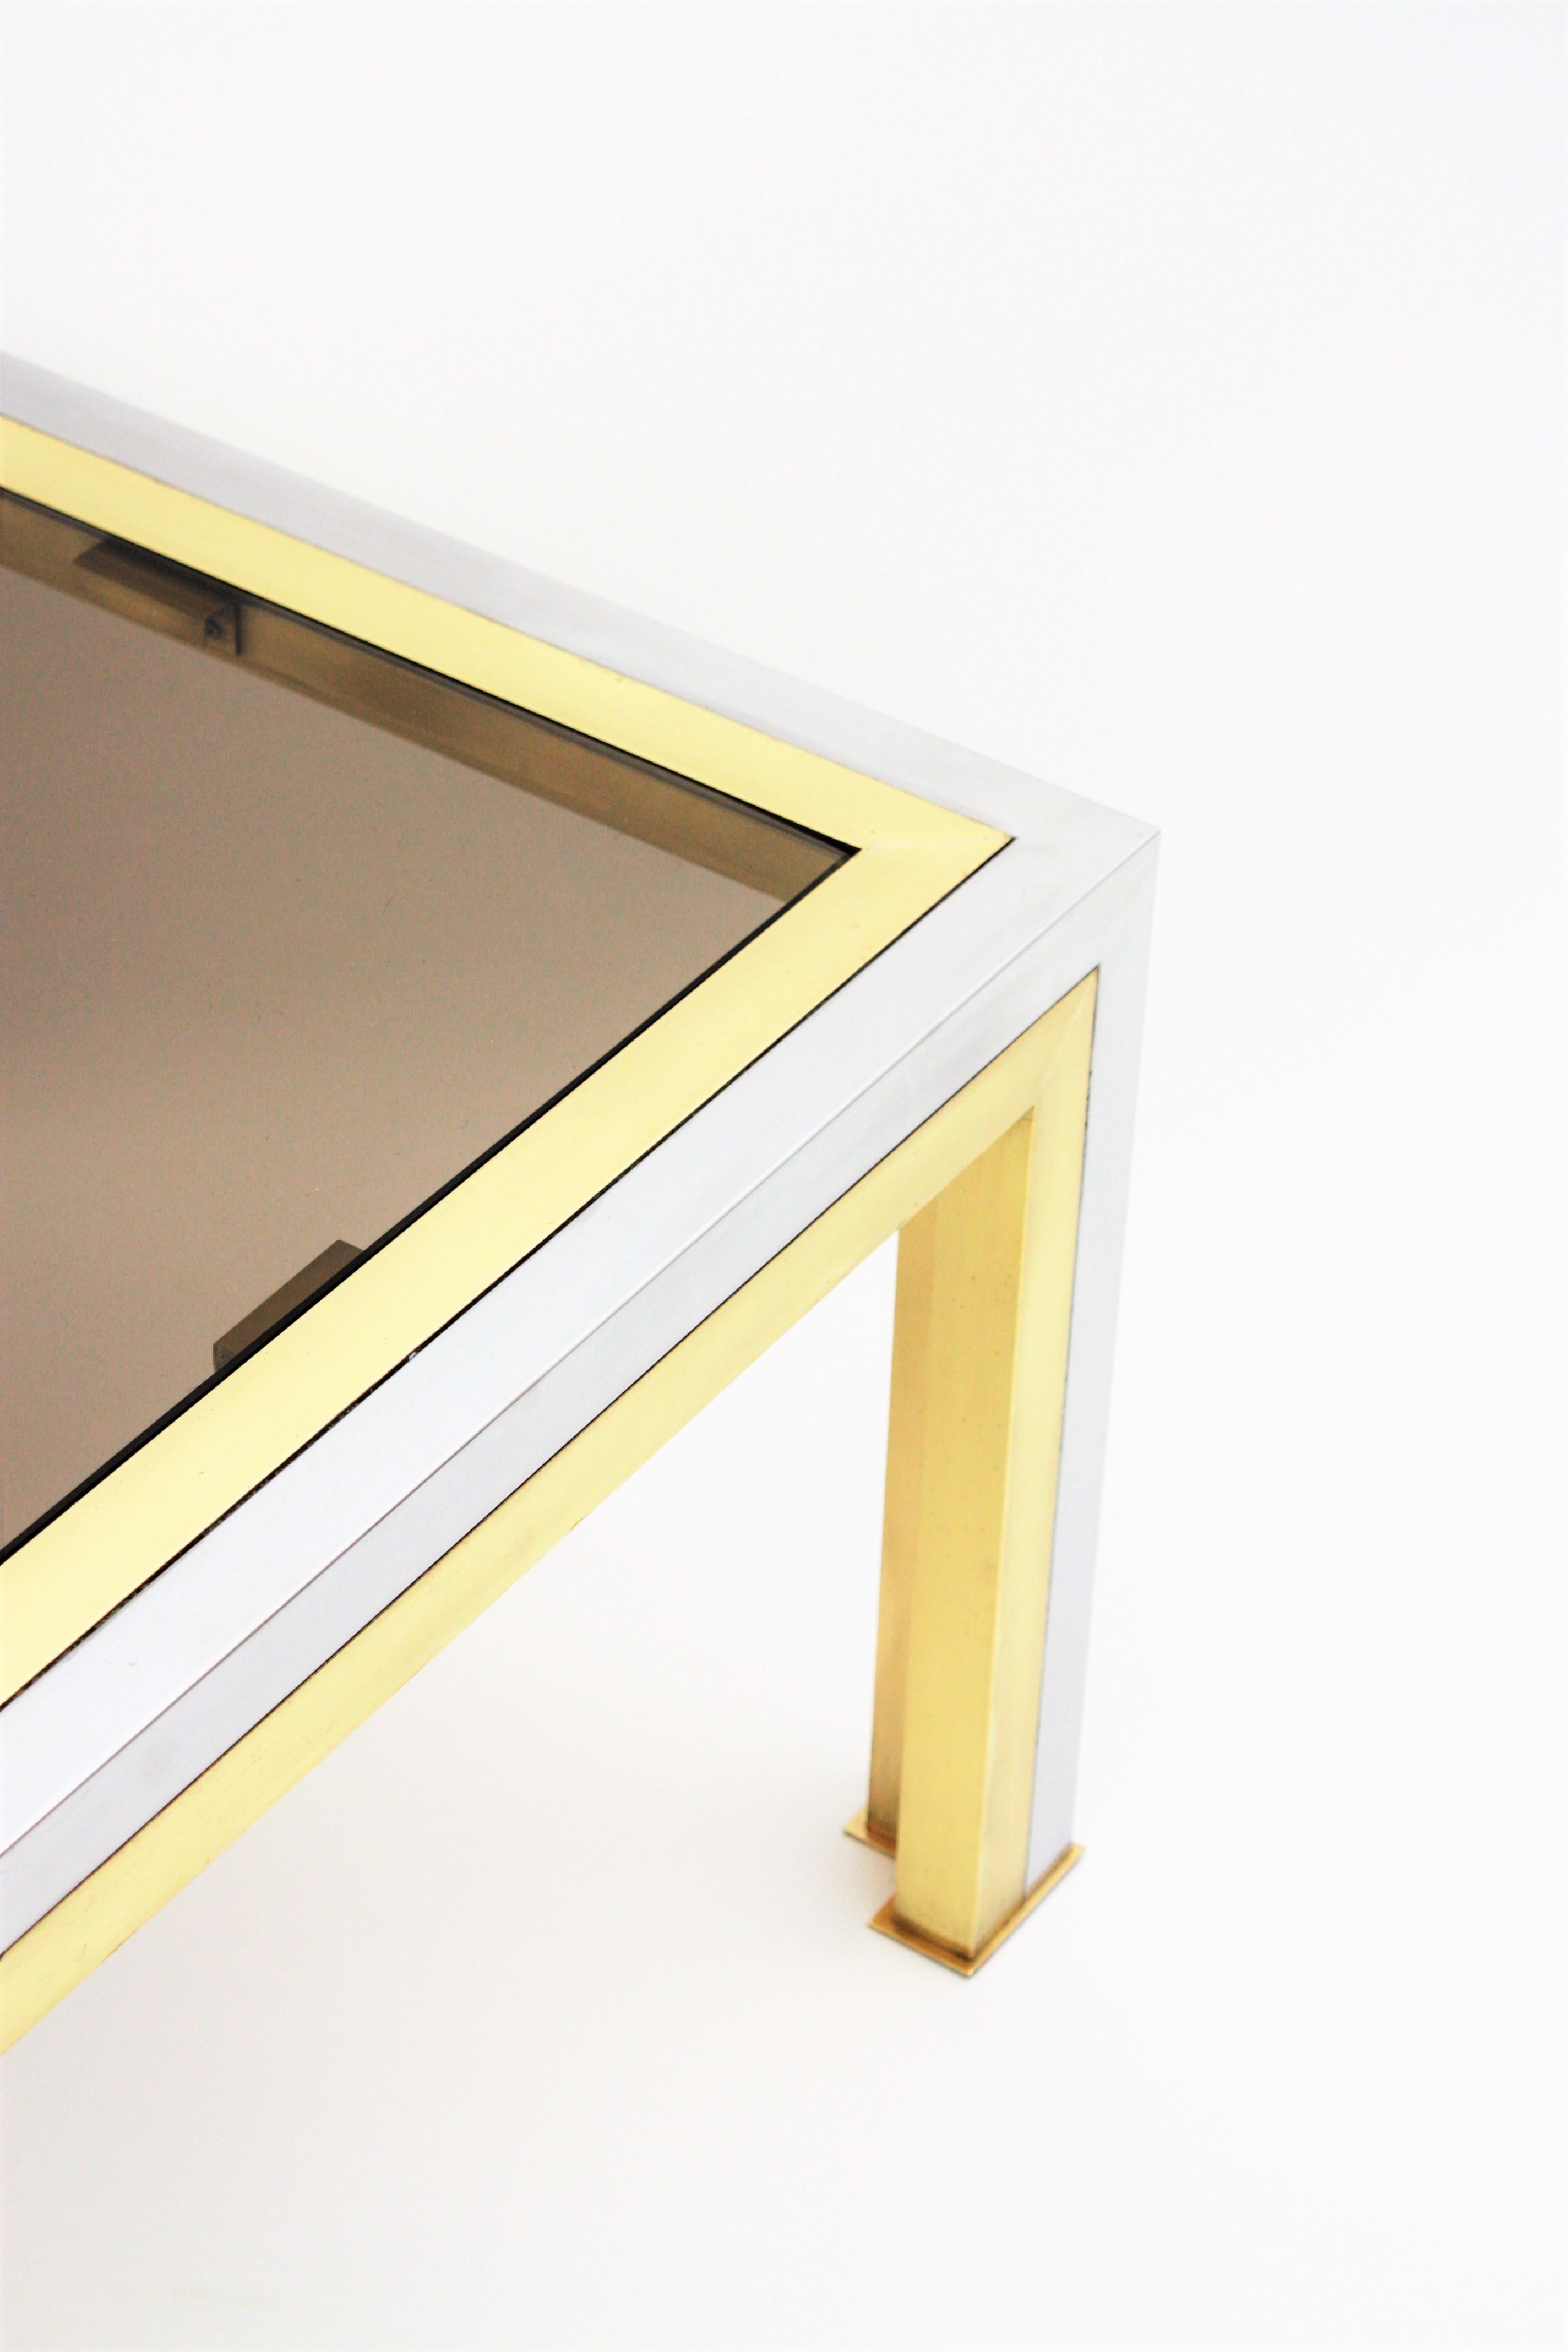 Romeo Rega Coffee Table in Brass, Chromed Steel and Glass 7